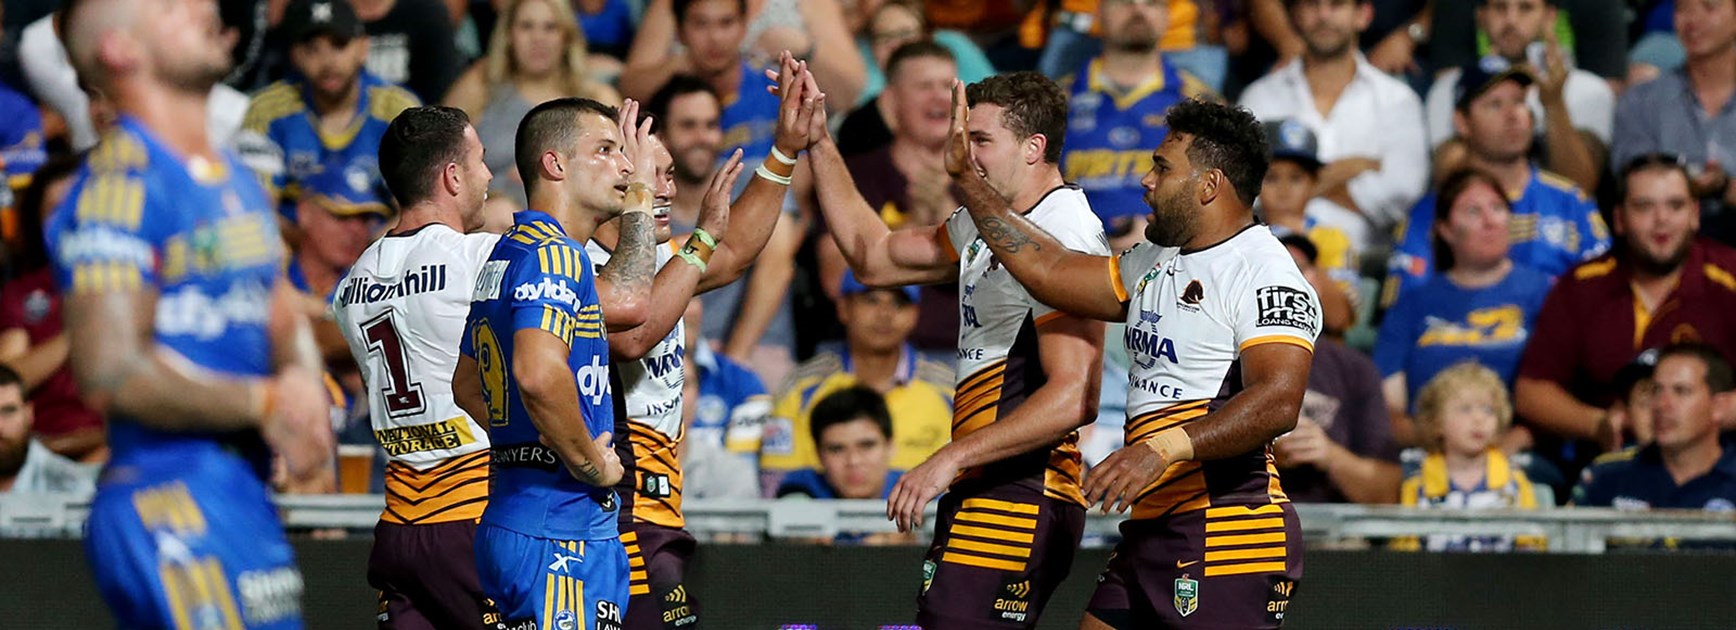 The Broncos celebrate a try against the Eels in Round 1.